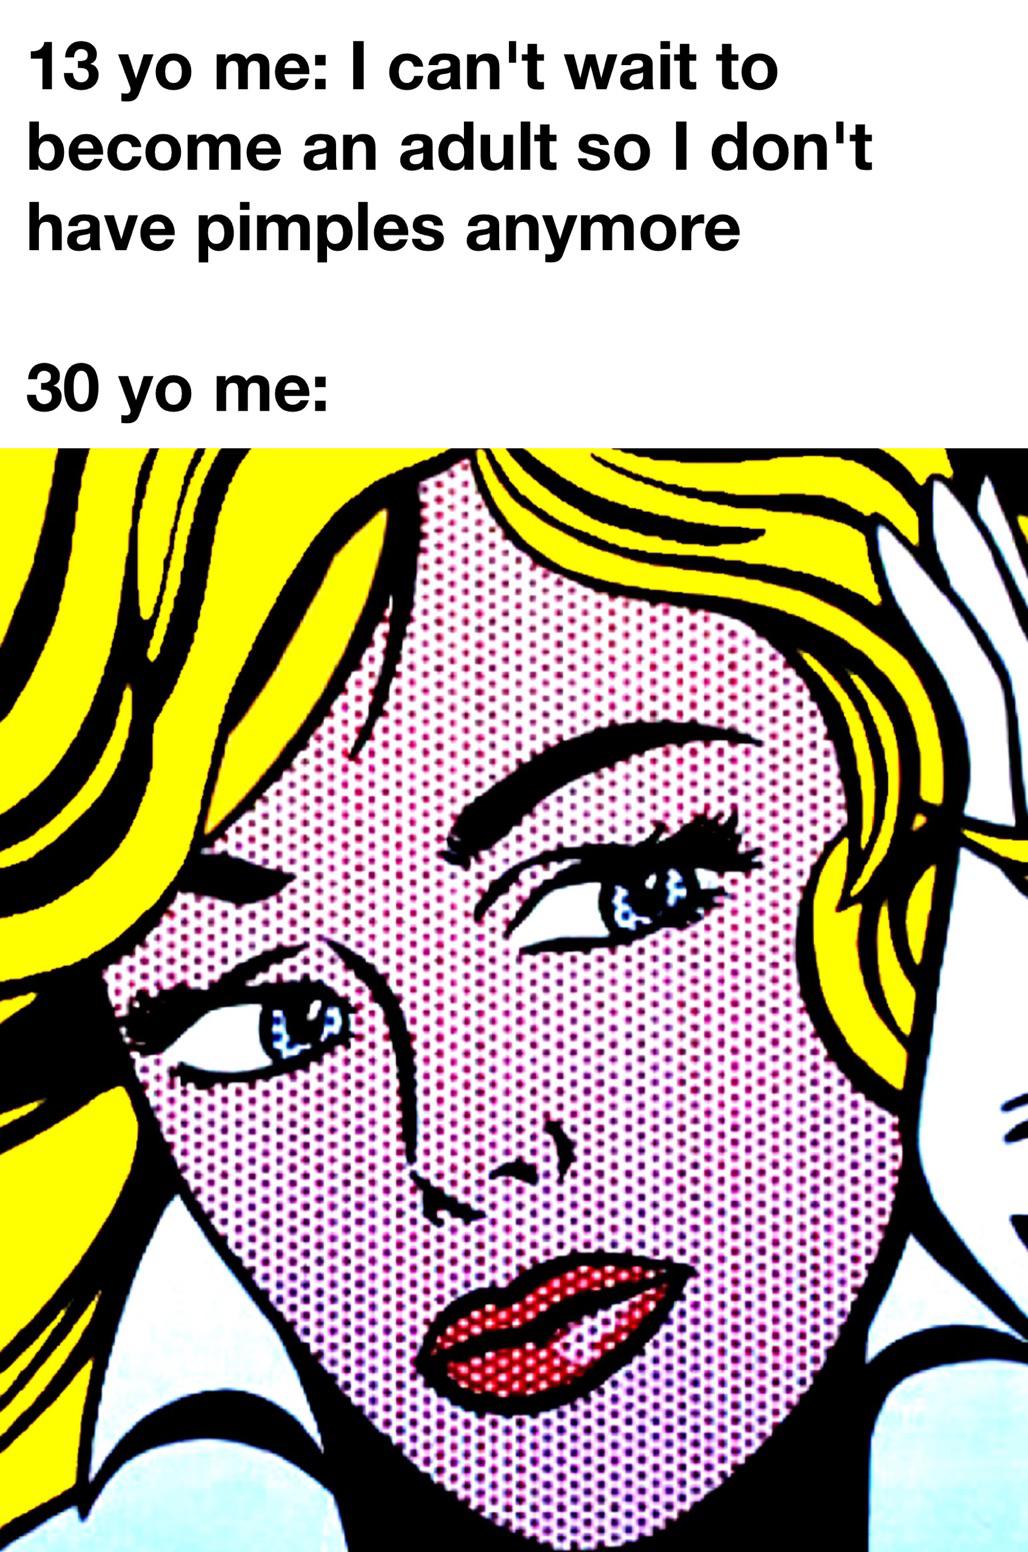 funny memes - roy lichtenstein maybe - 13 yo me I can't wait to become an adult so I don't have pimples anymore 30 yo me 8